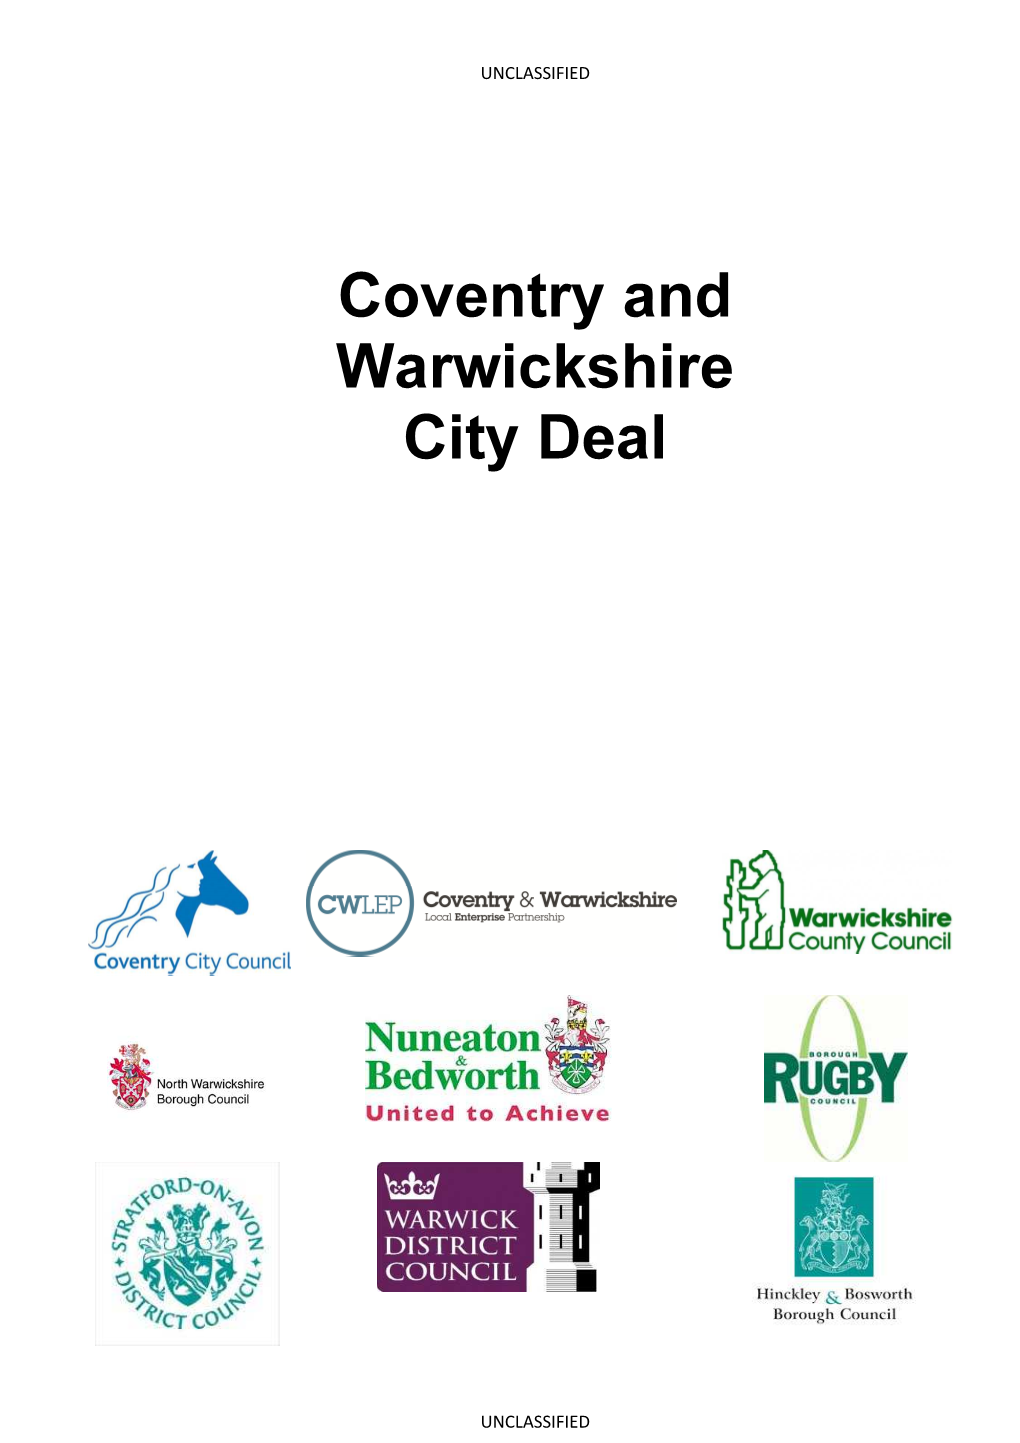 Coventry and Warwickshire City Deal